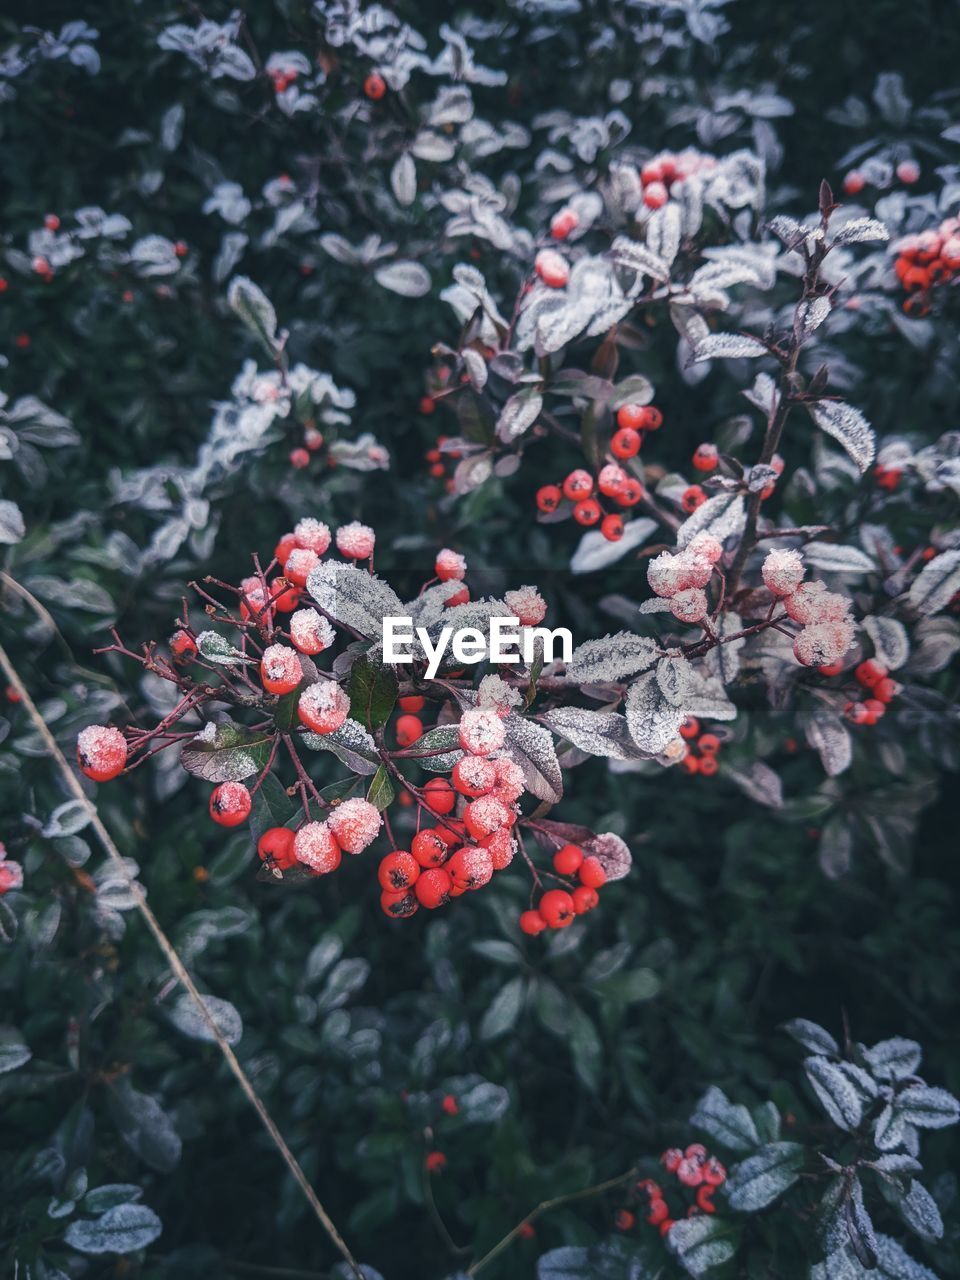 plant, growth, nature, beauty in nature, freshness, flower, tree, no people, flowering plant, red, day, branch, leaf, berry, fruit, outdoors, plant part, close-up, food and drink, fragility, healthy eating, food, shrub, focus on foreground, winter, produce, blossom